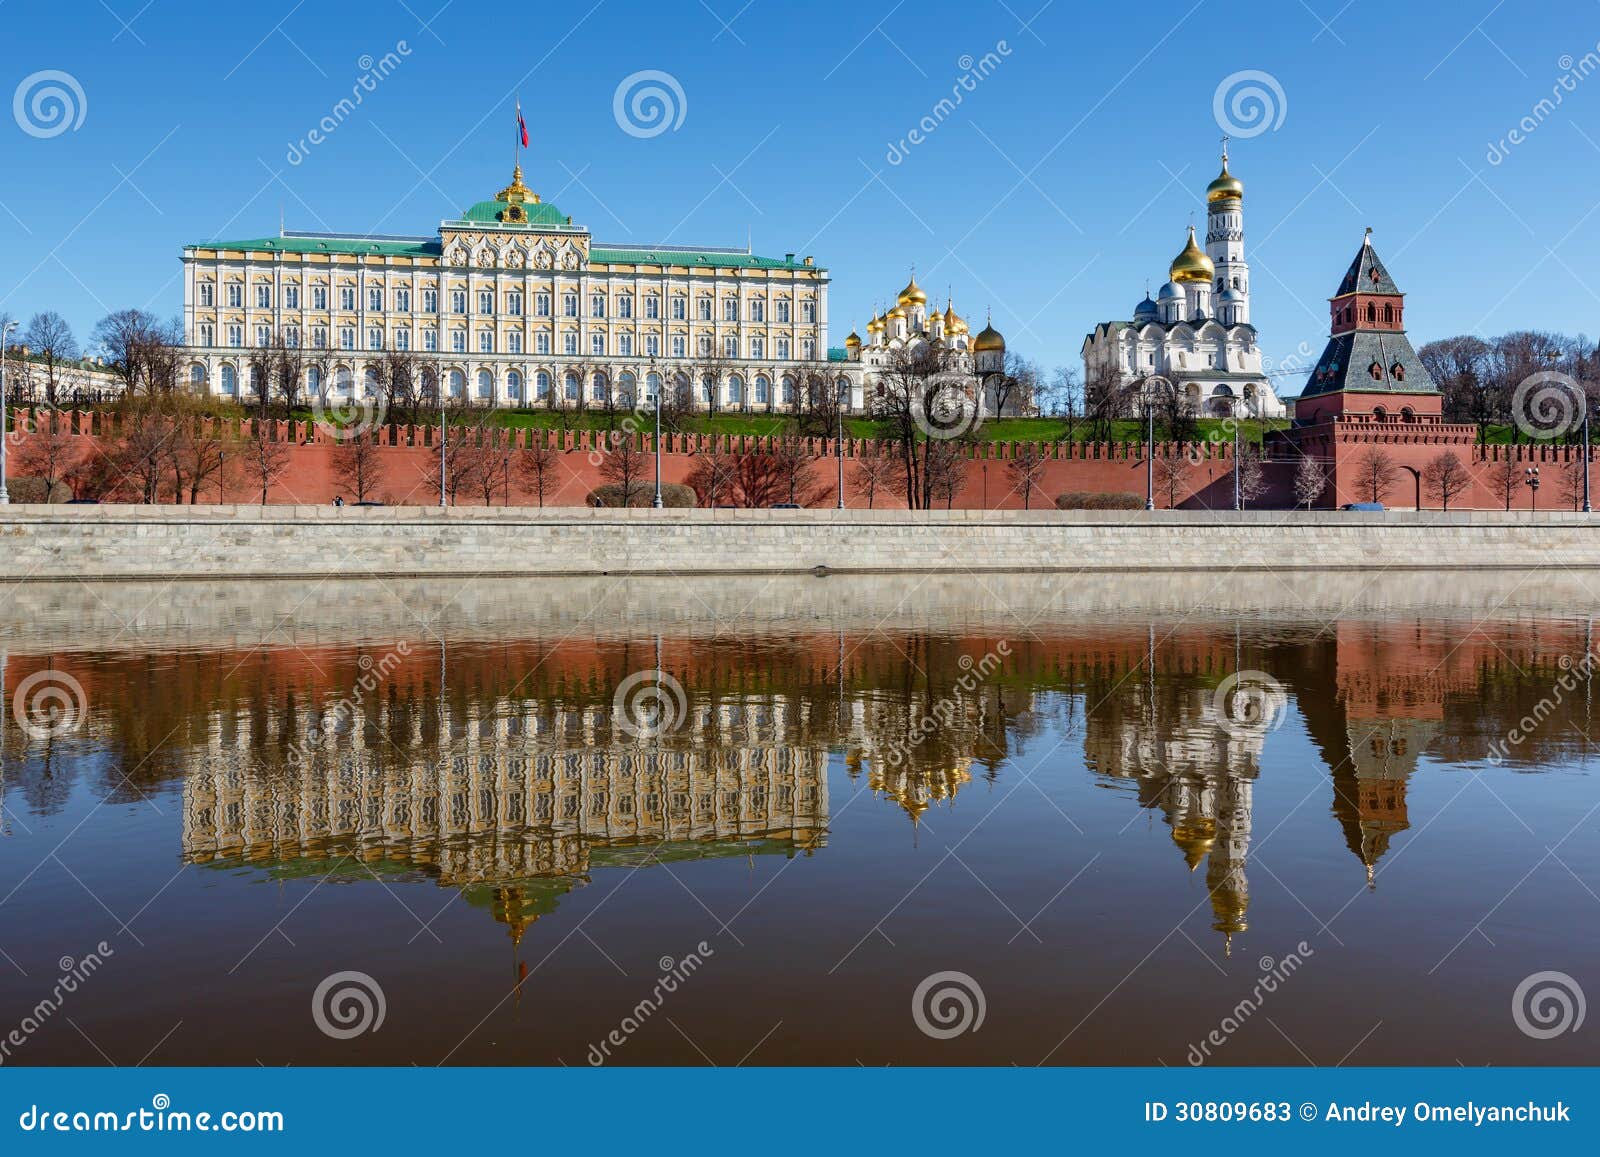 moscow kremlin and ivan the great bell tower